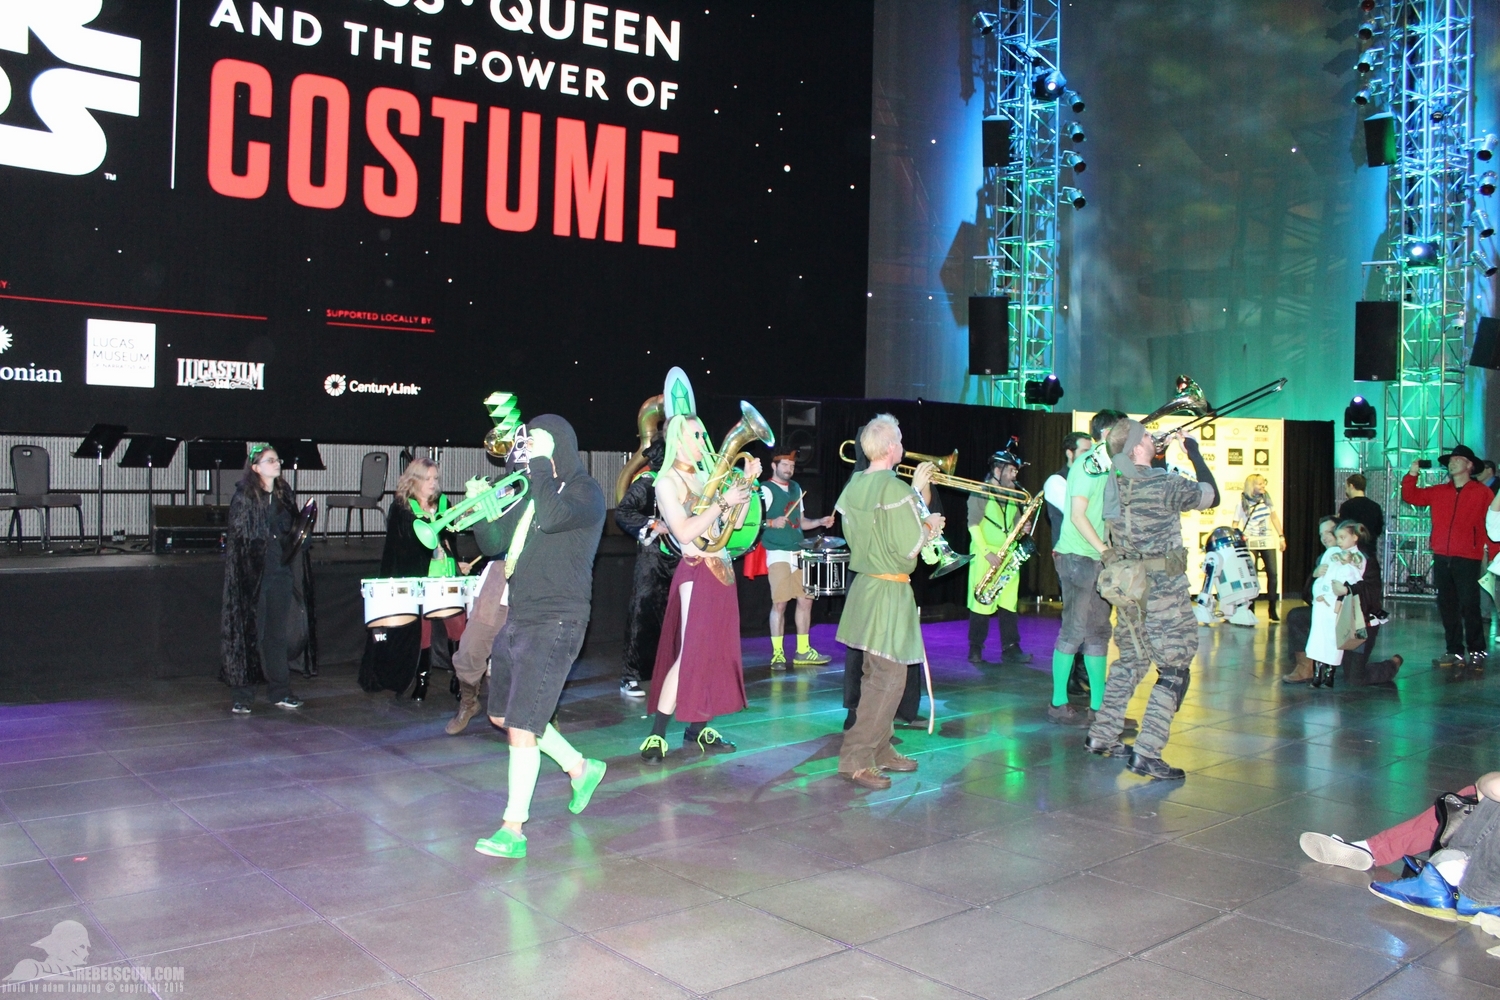 star-wars-the-power-of-costume-seattle-emp-museum-launch-party-013015-009.JPG